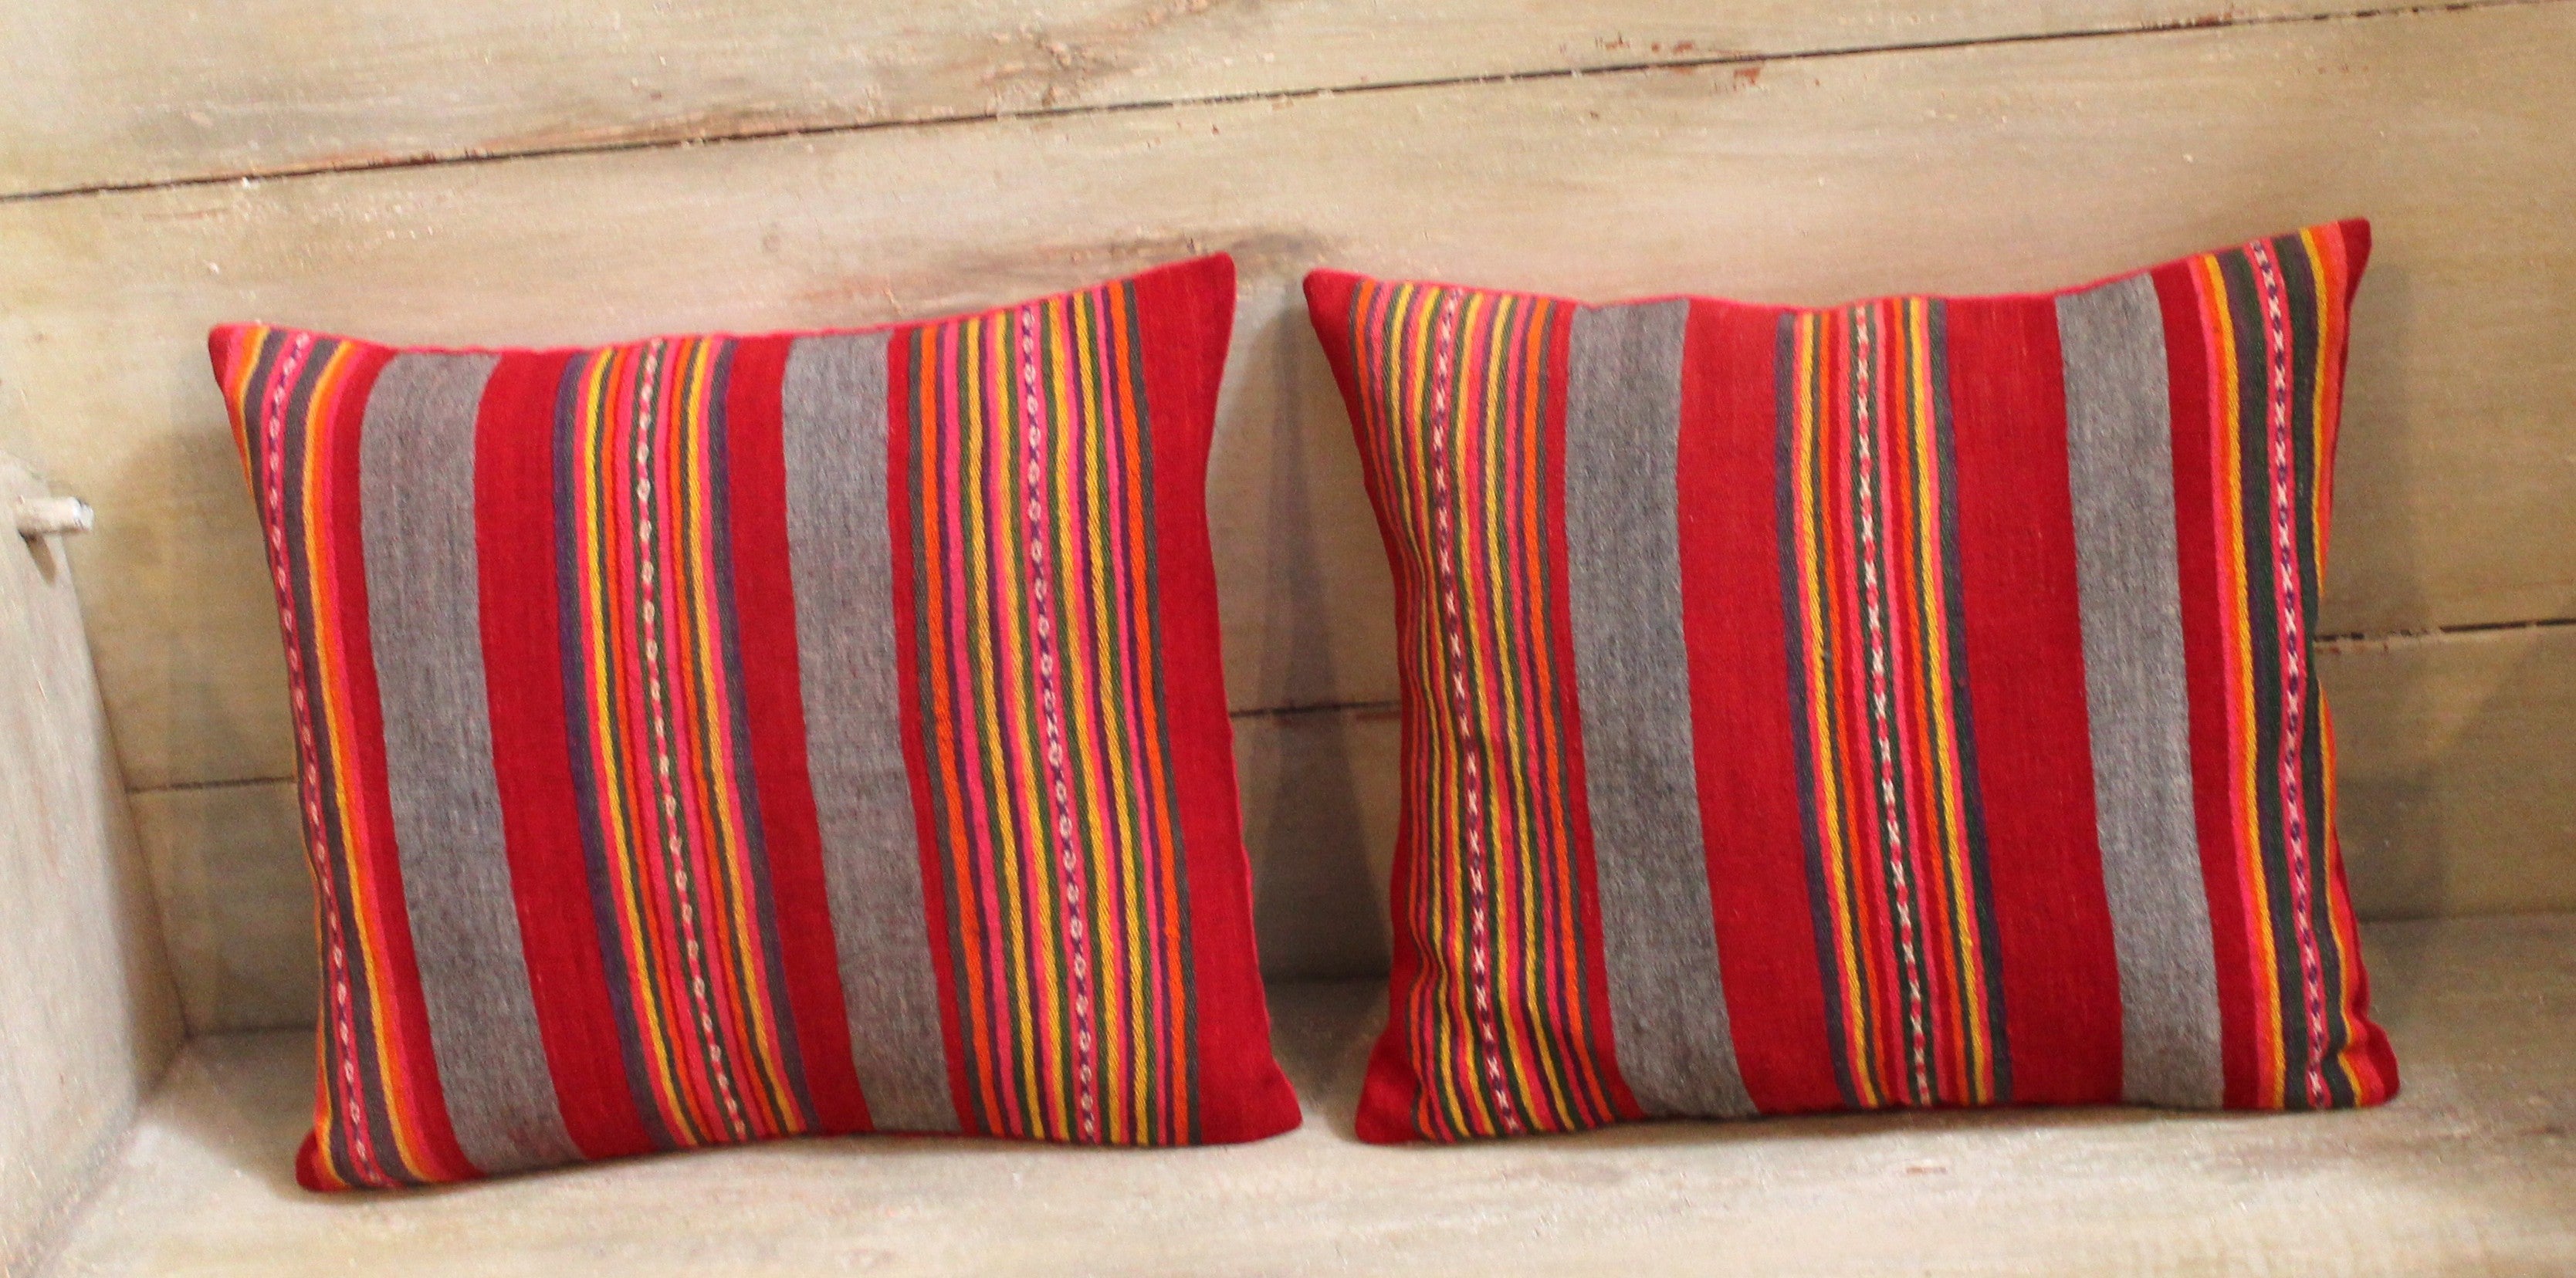 Colorful Pair of Early 20th Century Red and Gray Wool Striped Pillows